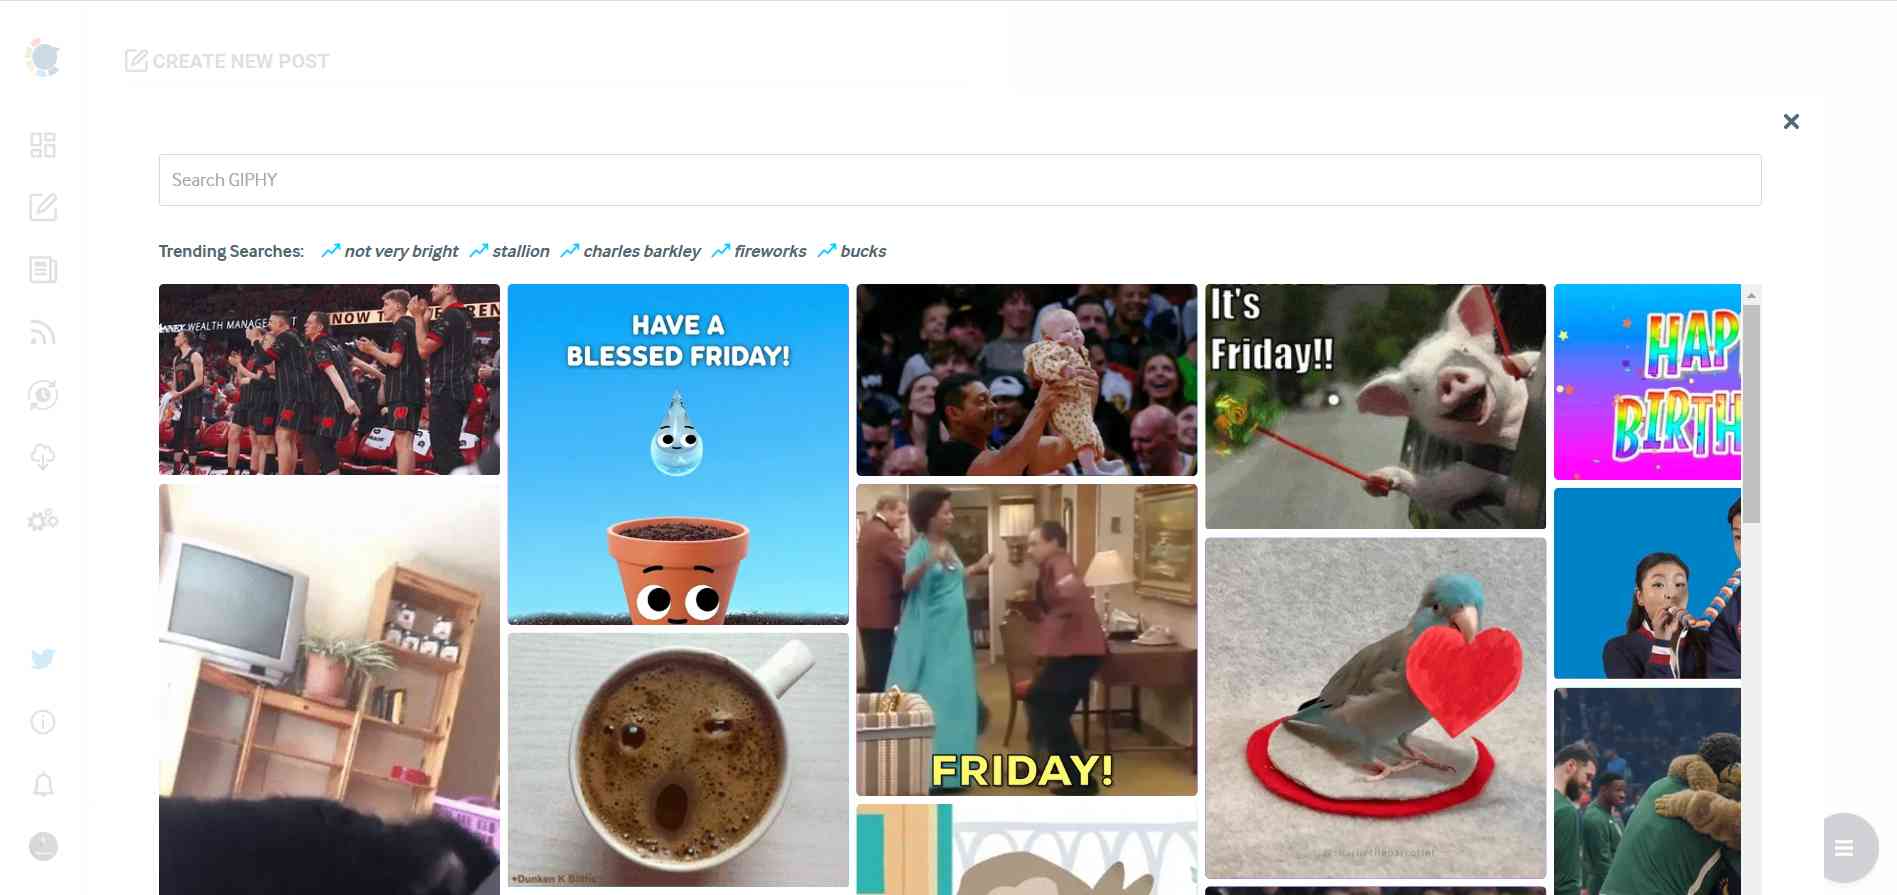 GIFs can also serve as Instagram curated content